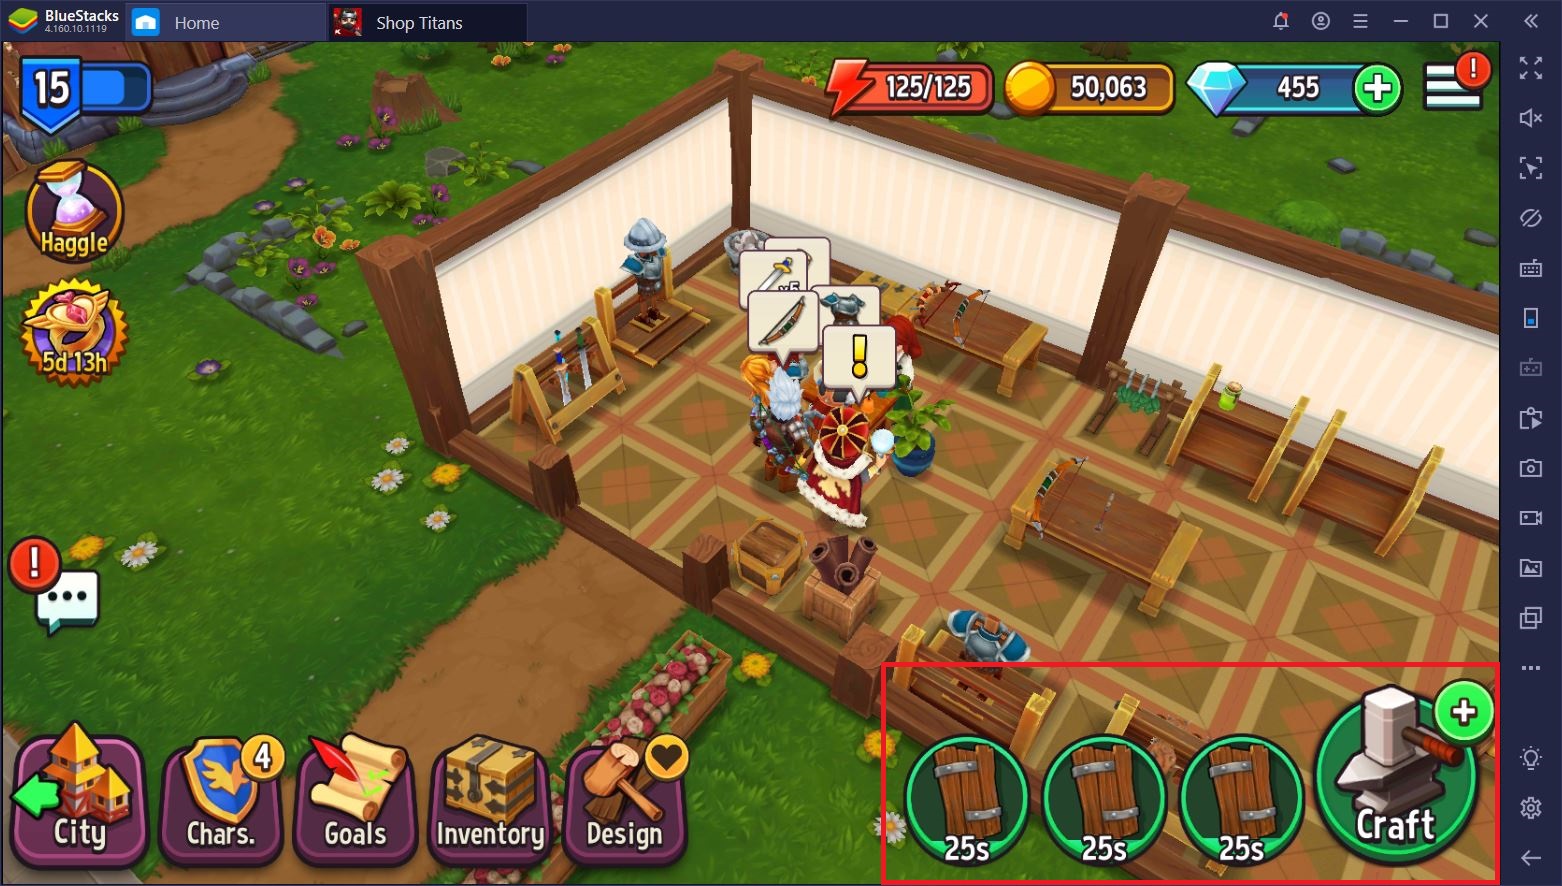 Shop Titans: How to Spend Your Resources Wisely | BlueStacks